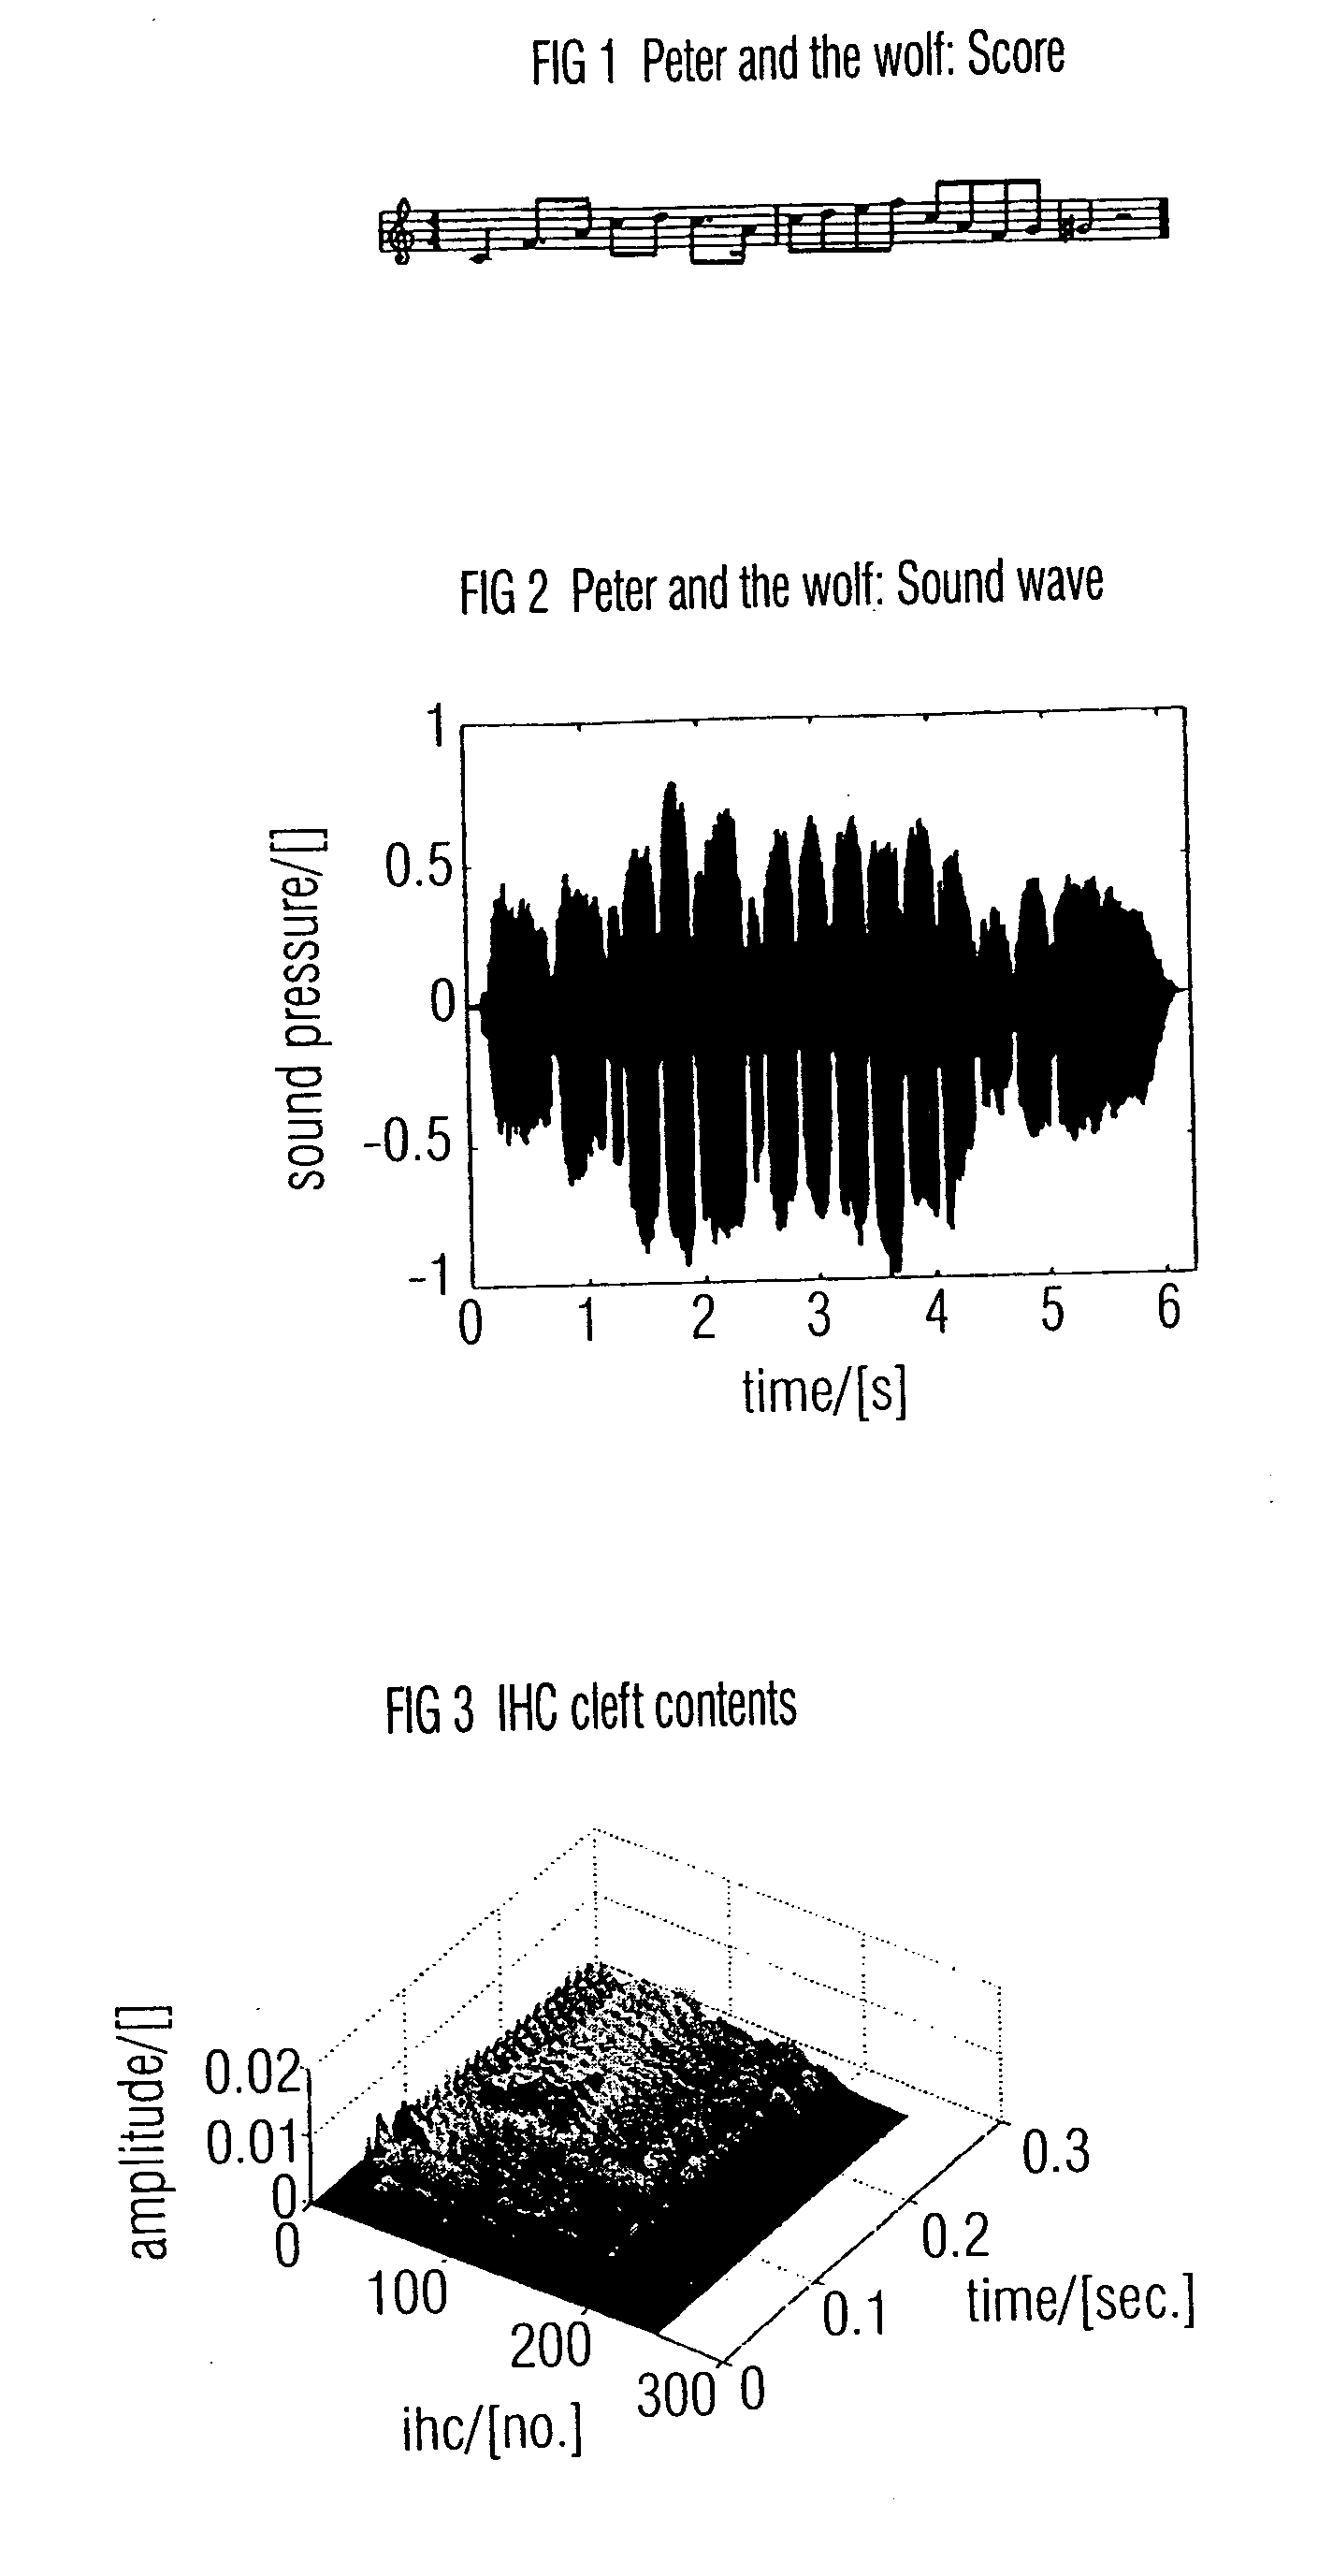 Apparatus and method for analyzing a sound signal using a physiological ear model